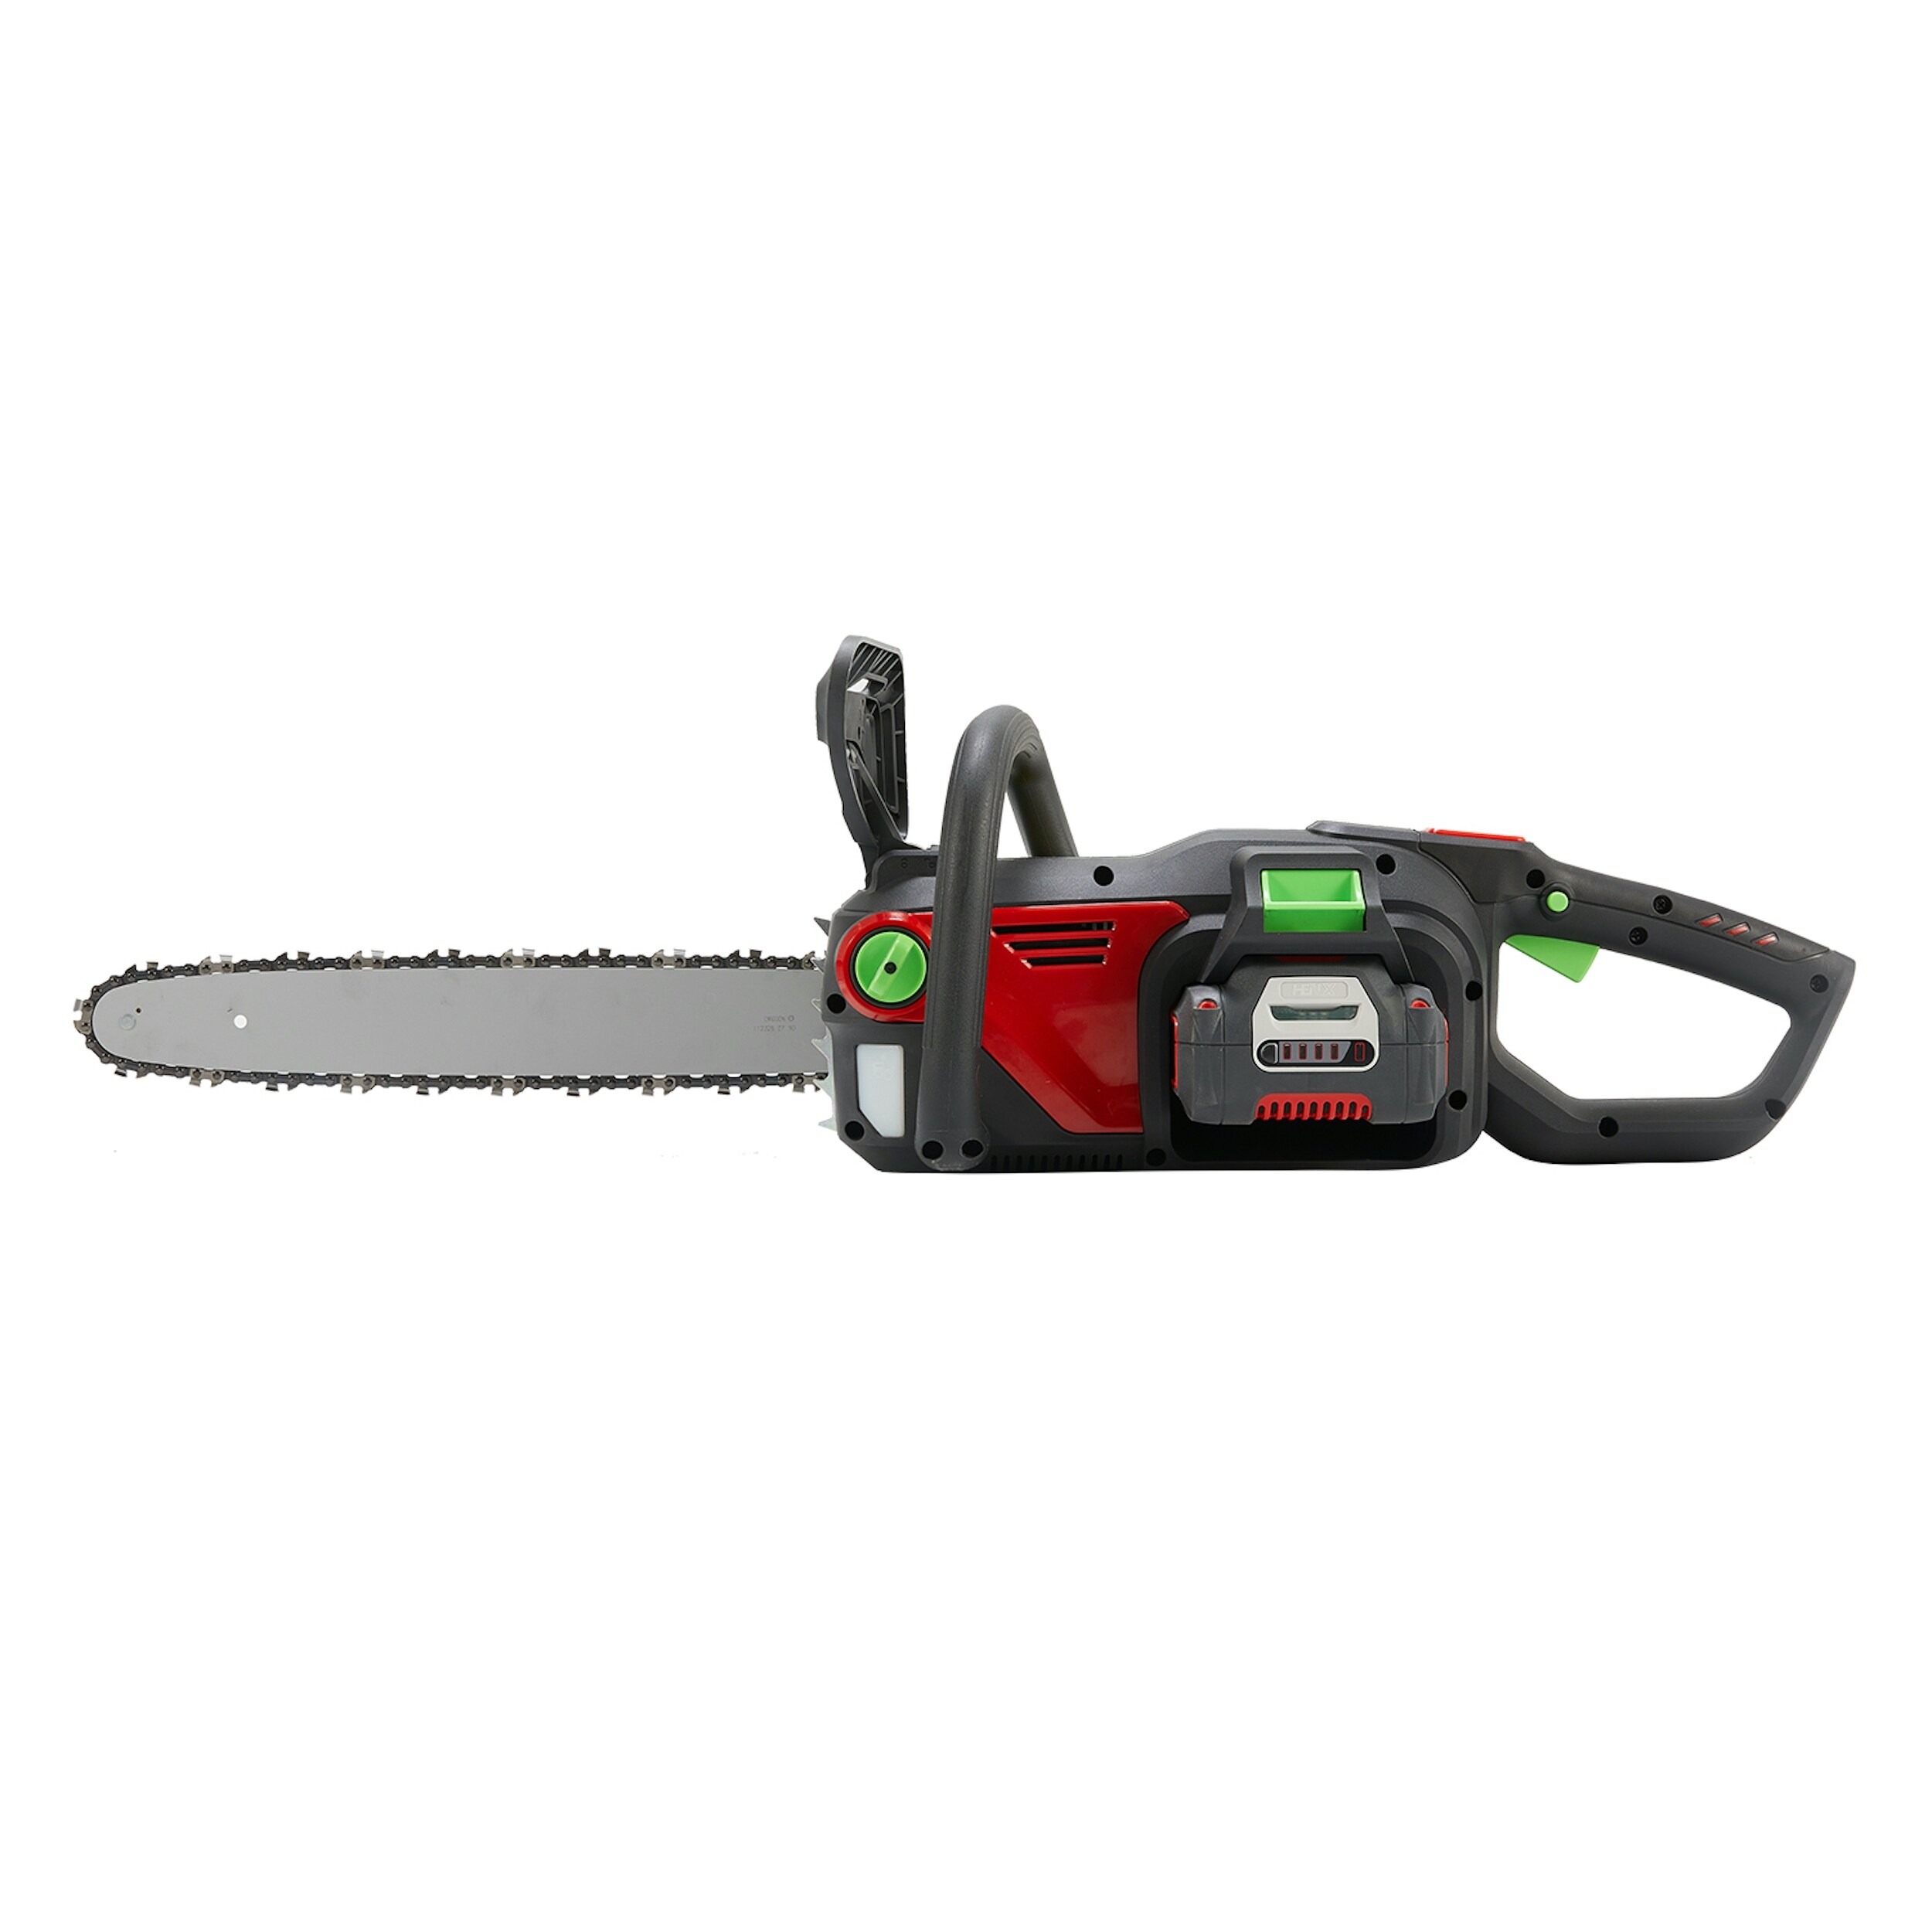 https://ak1.ostkcdn.com/images/products/is/images/direct/df13166907b9a1a26ec600ee522765ff095cfa65/Henx-16-inch-40V-Cordless-Chain-Saw-w--Charger-%26-Battery.jpg